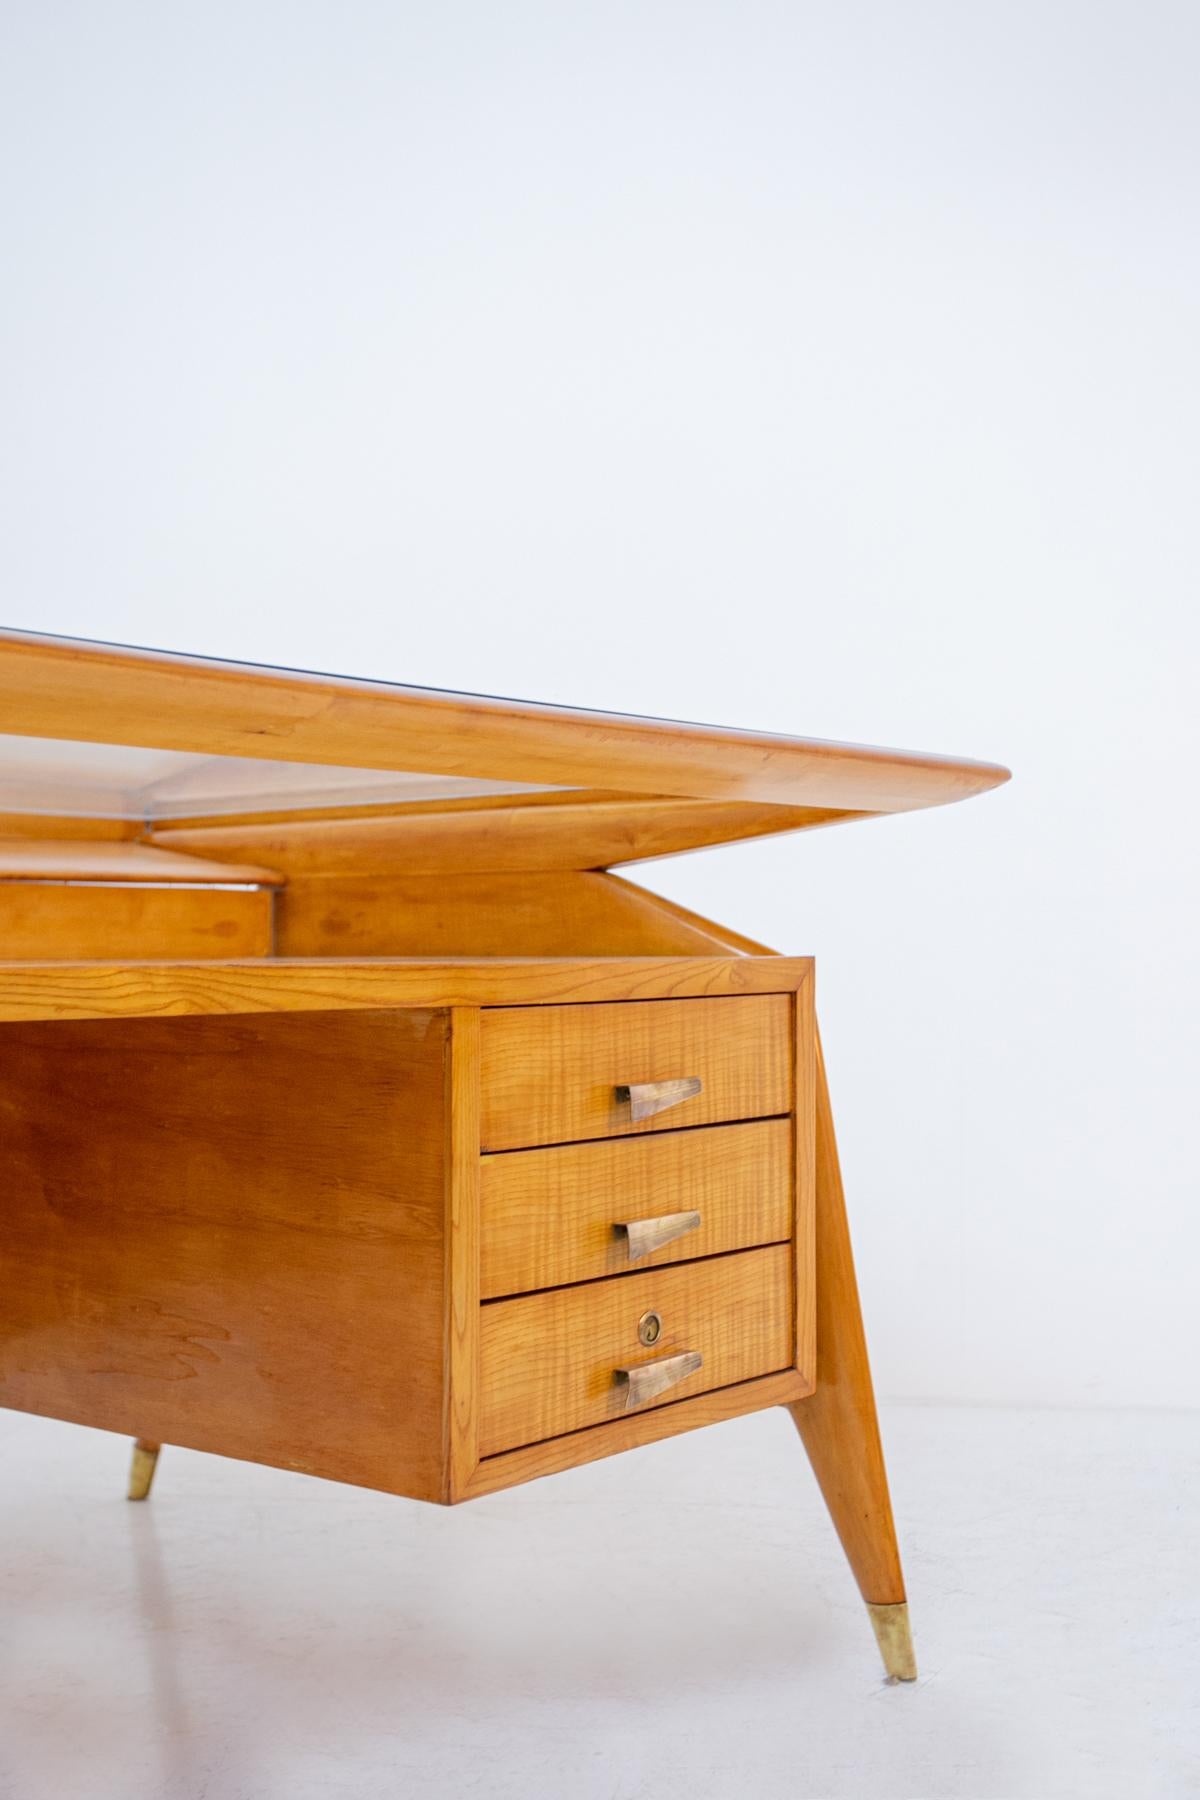 Carlo de Carli Important Desk in Wood Glass and Brass, 1950s Published 1